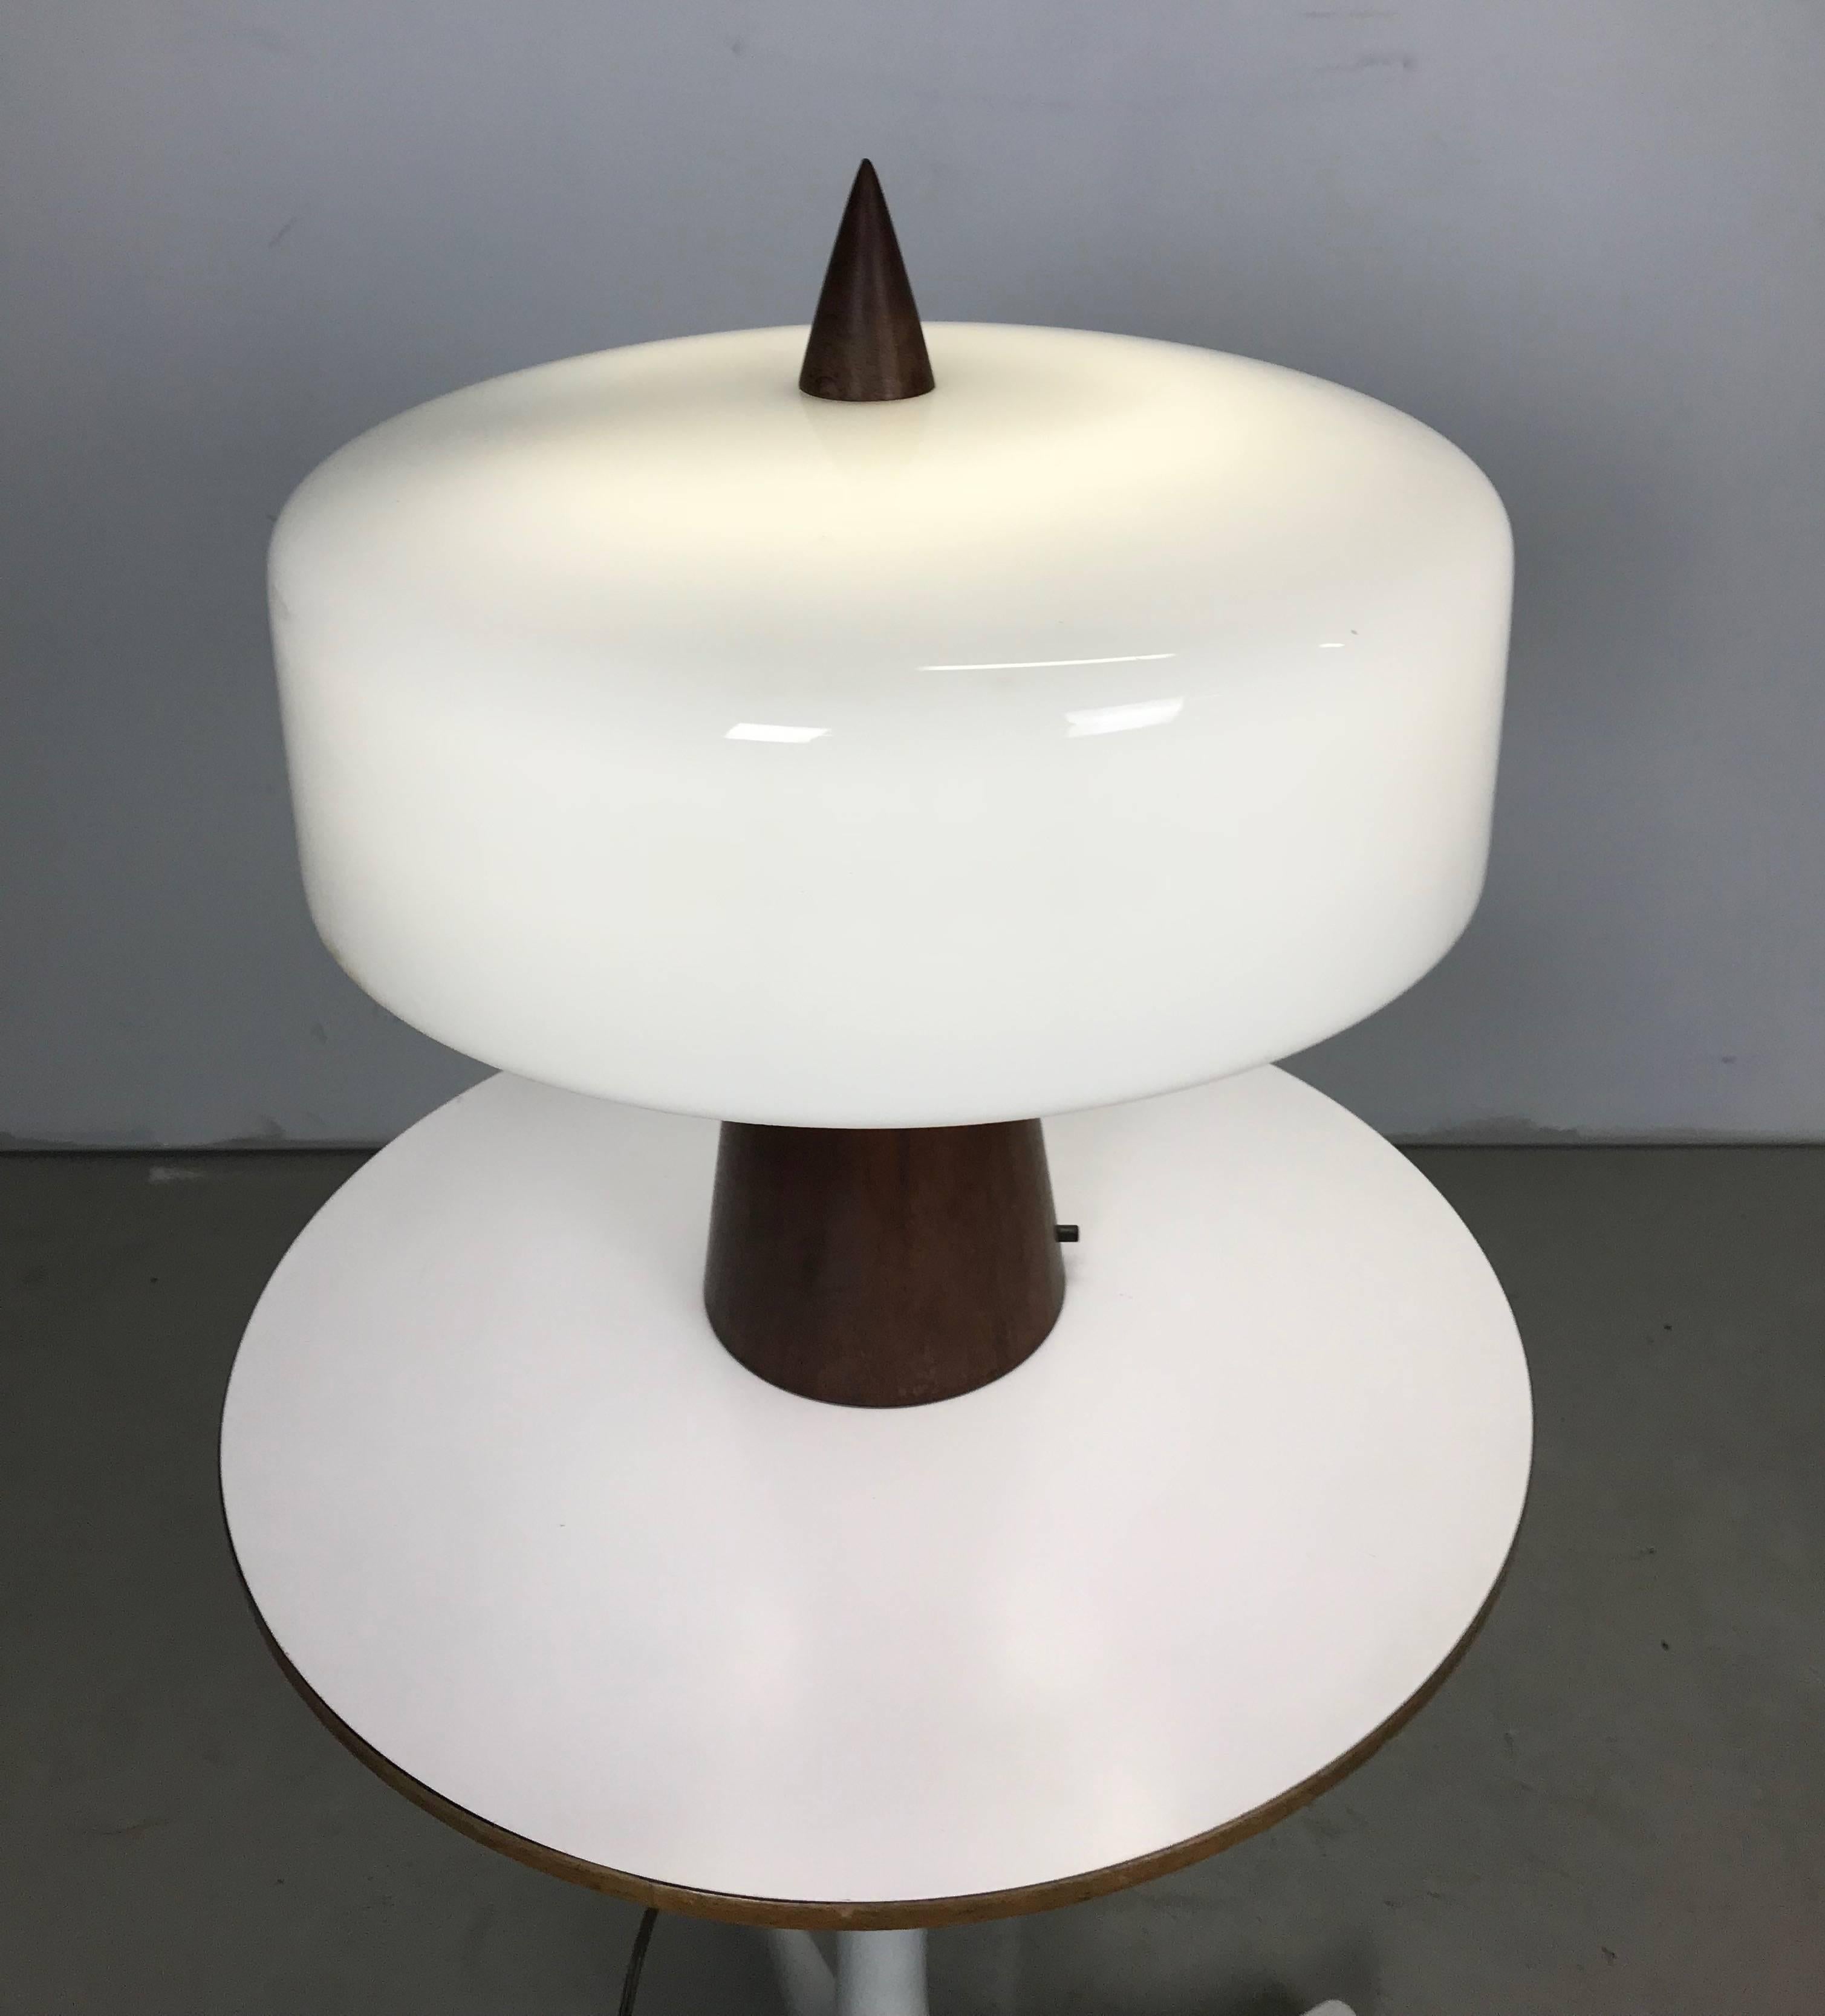 This is a one of a kind turned walnut and milk glass desk lamp. It was designed, circa 1960 by Phillip Enfield for a friend and client. It is in excellent original condition and has been owned by the same person since new. A fine and rare piece of